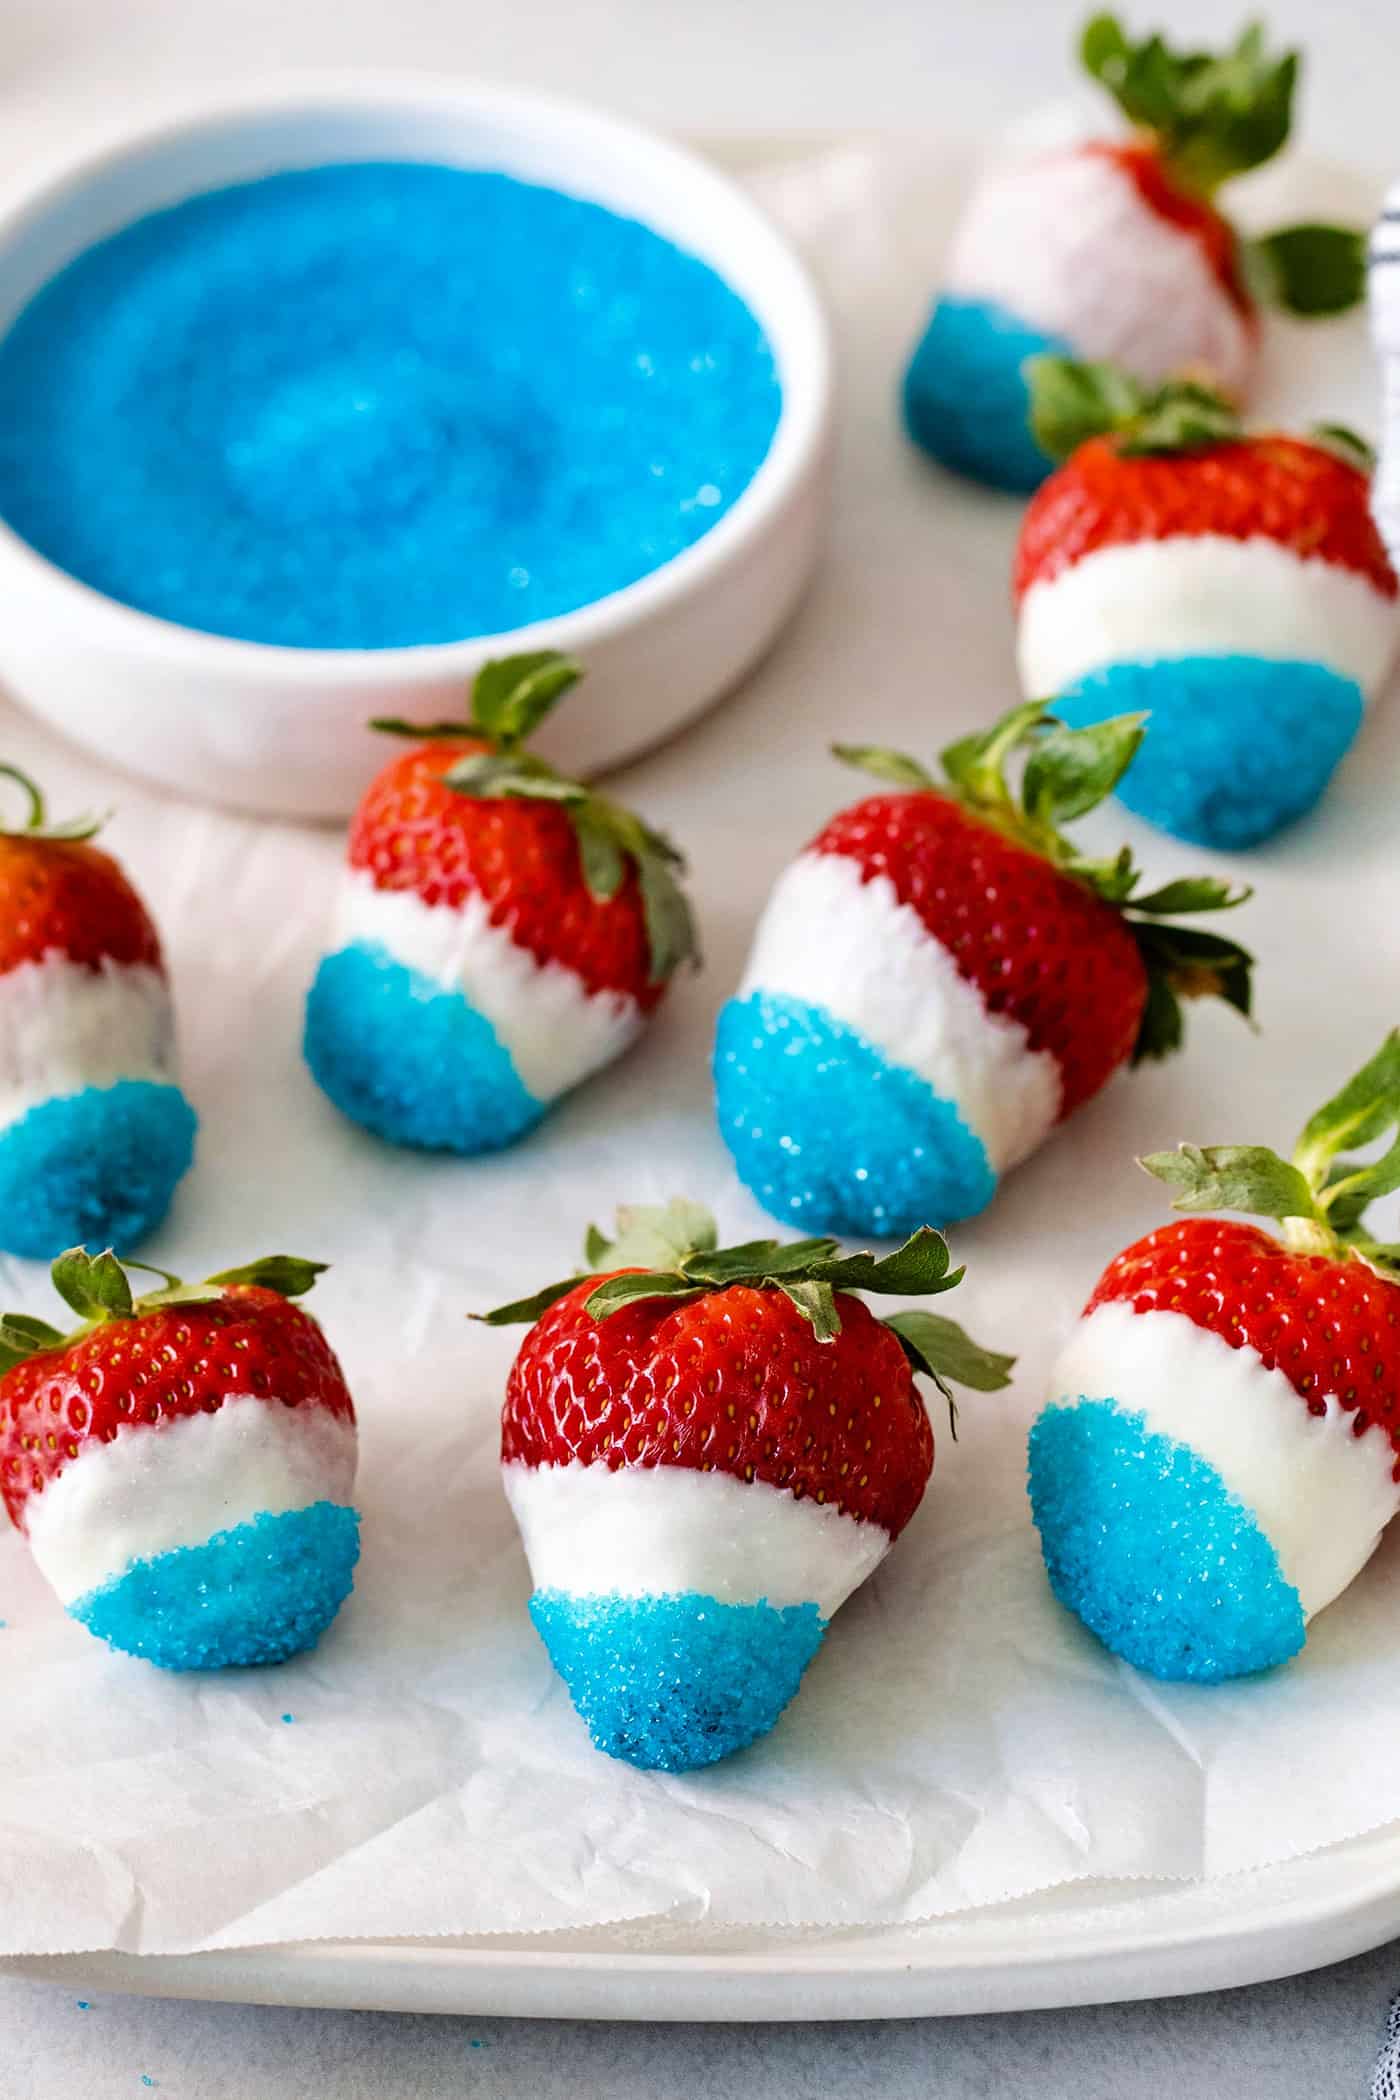 Angled overhead view of red white and blue chocolate covered strawberries